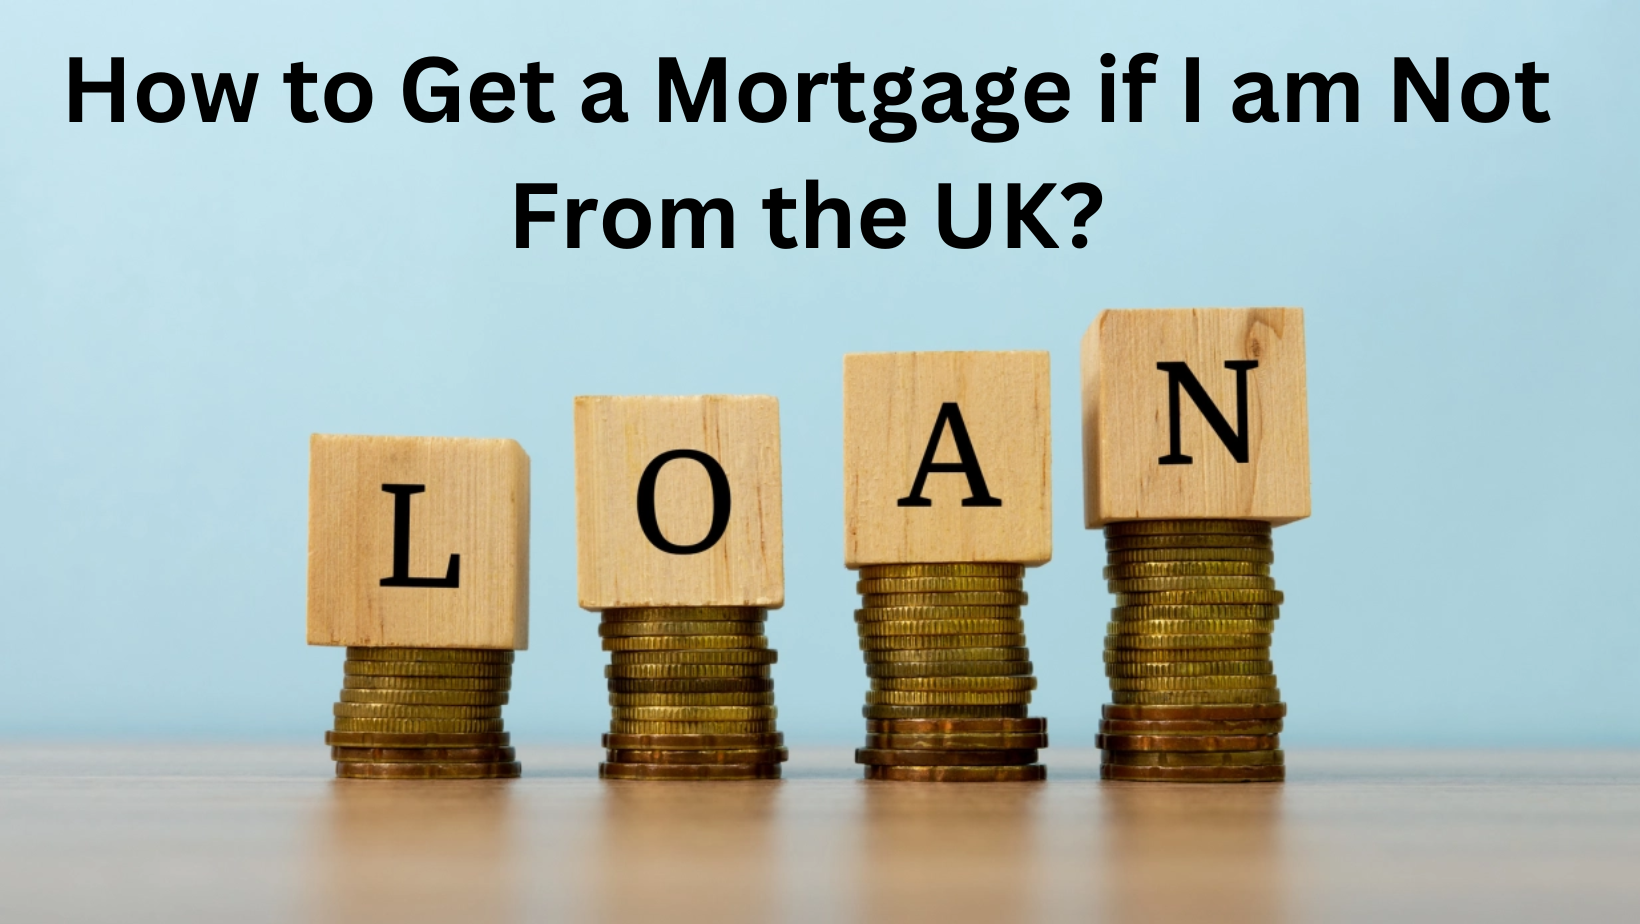 How to Get a Mortgage if I am Not From the UK?